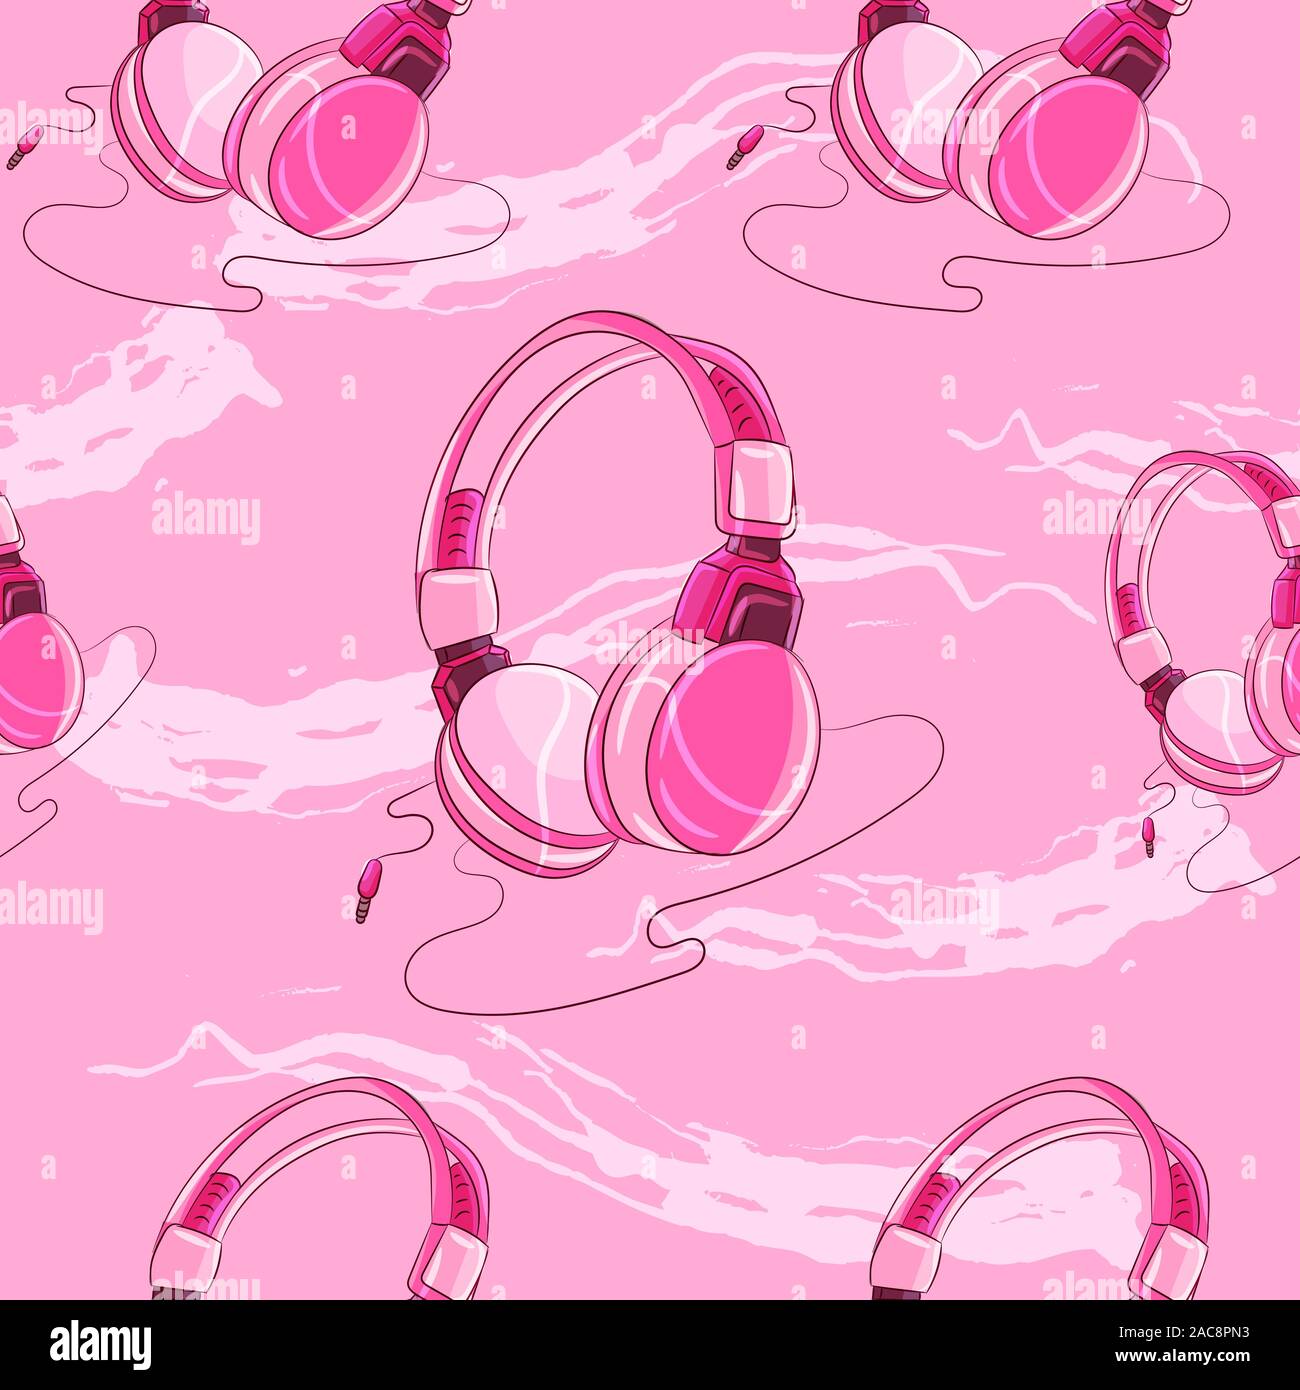 Pink girly headphones with a cable seamless pattern. Music genres, audio connection illustration. Stock Vector